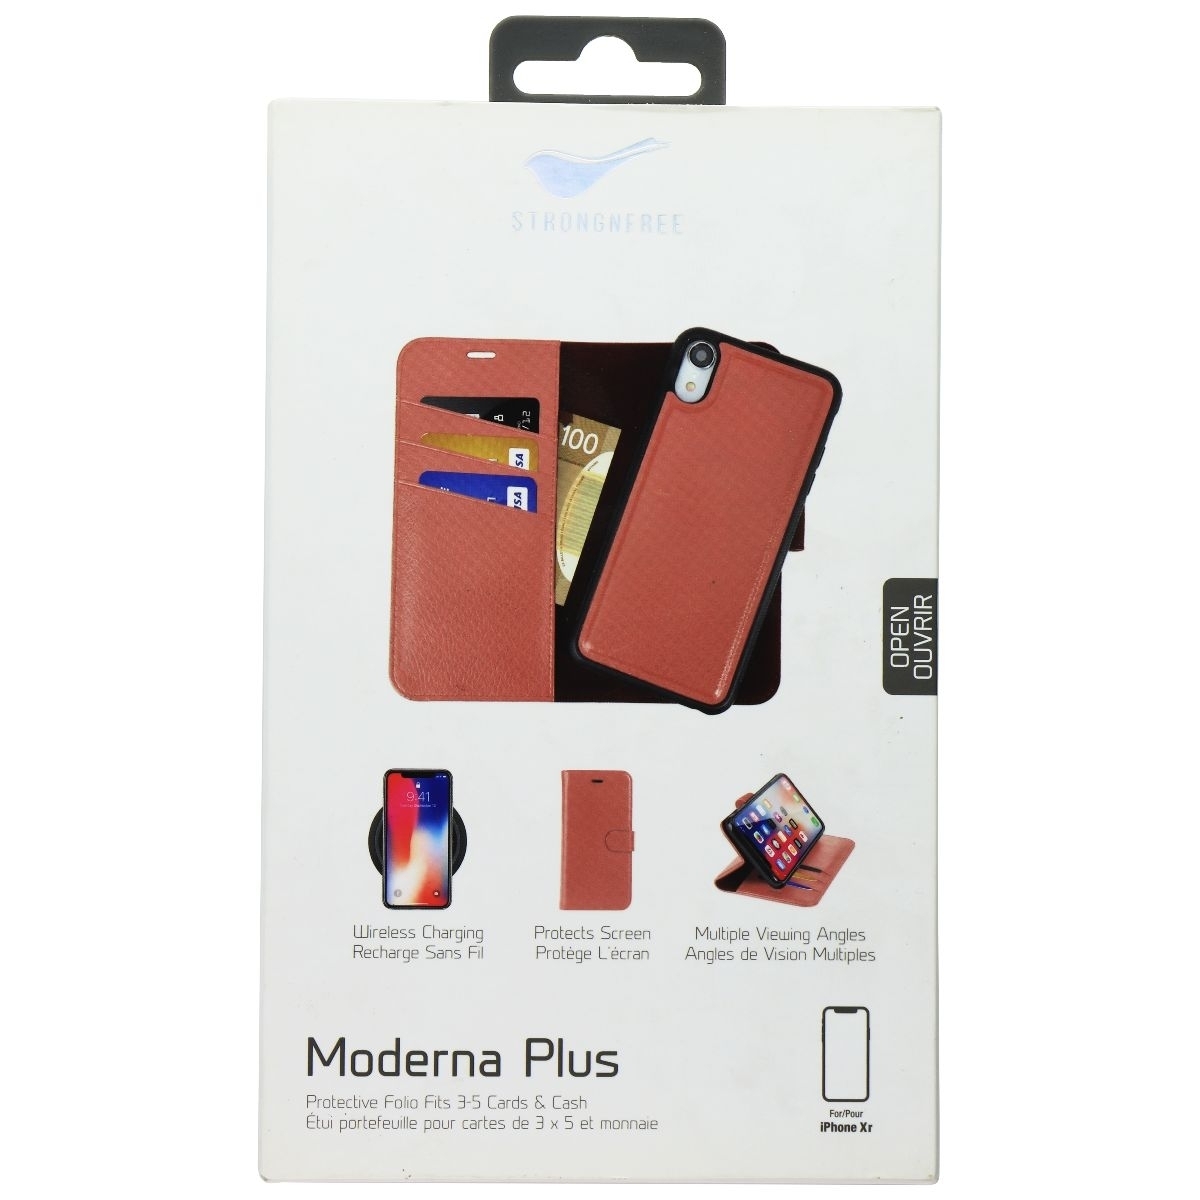 StrongNFree Moderna Plus Series 2-in-1 Wallet Case For IPhone XR - Dusty Red (Refurbished)